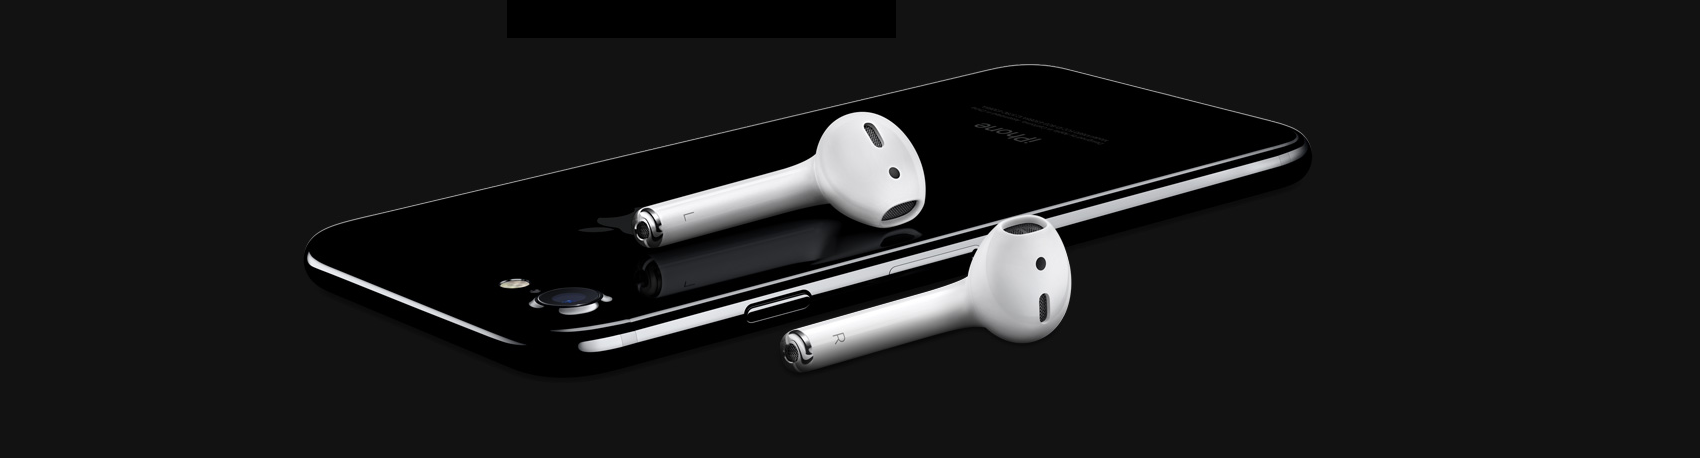 iPhone 7 with AirPods